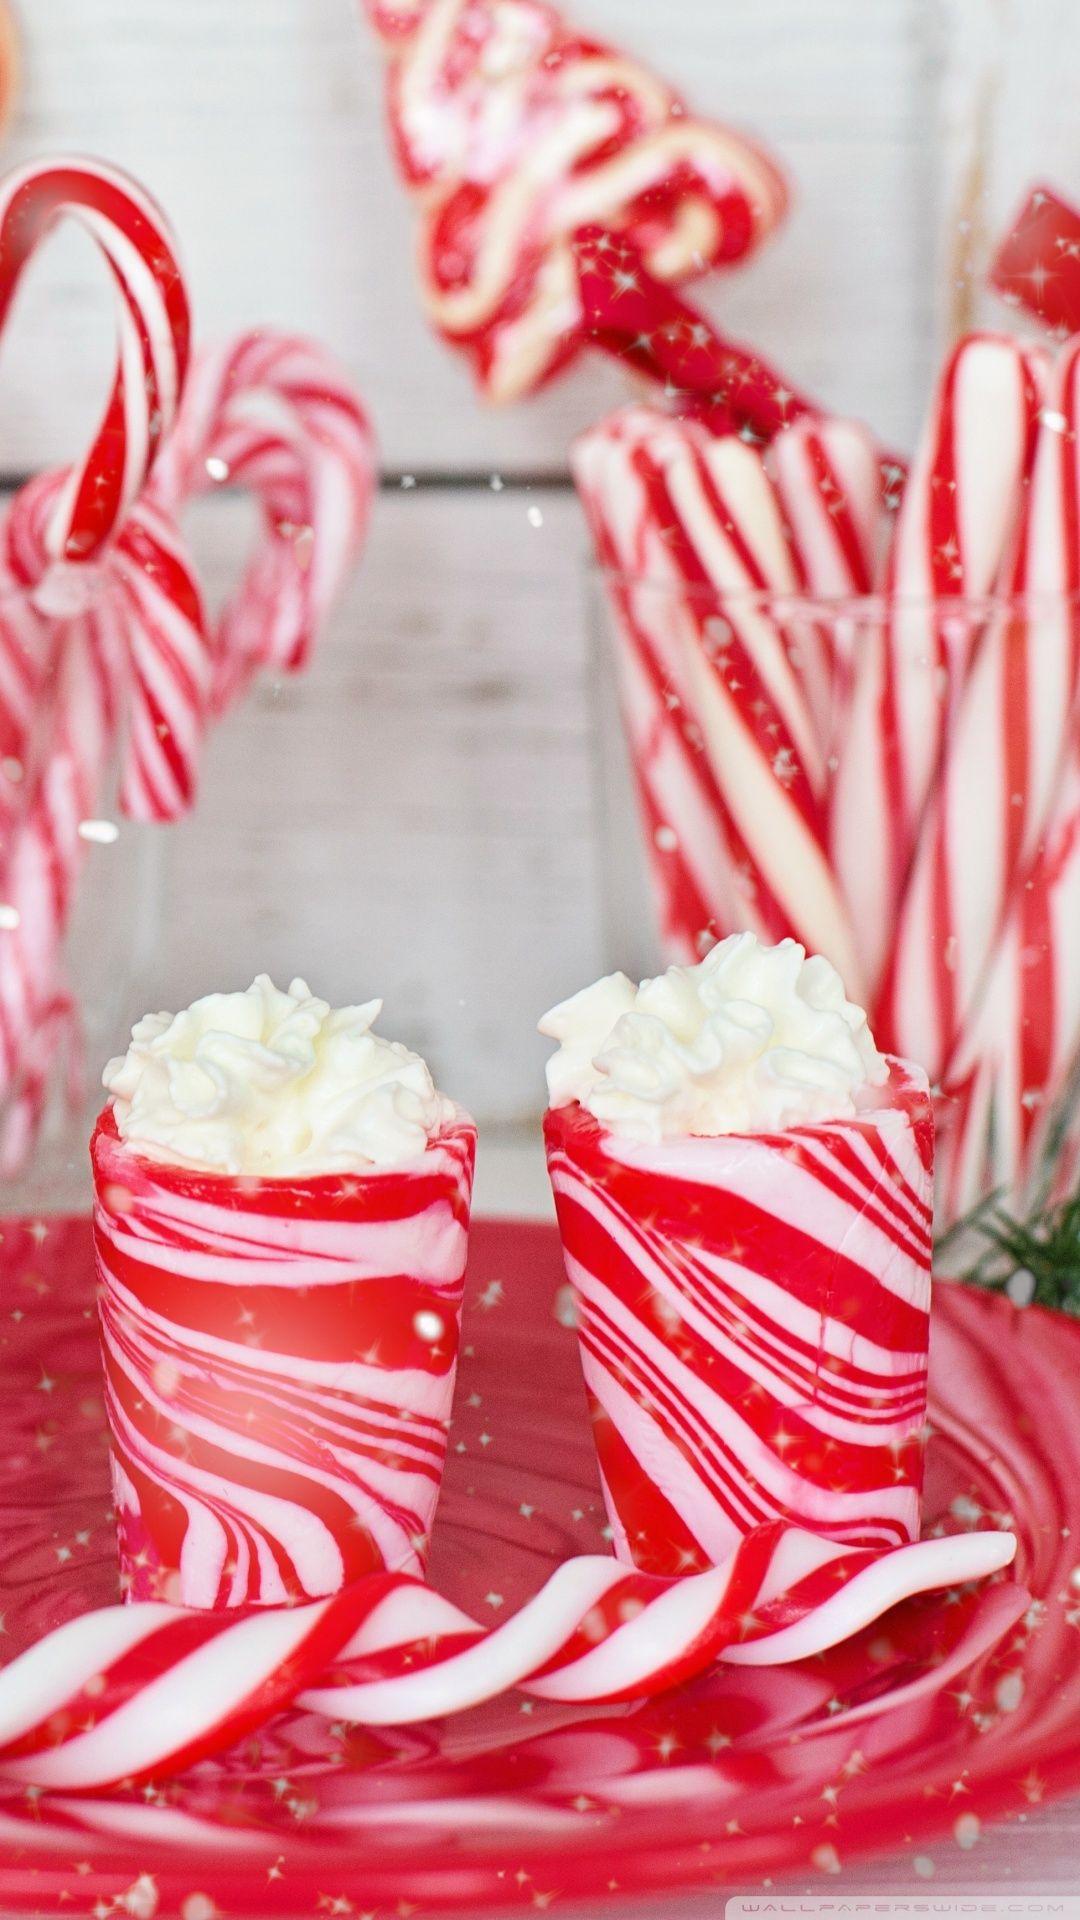 Candy Canes with Red Stripes, Peppermint ❤ 4K HD Desktop Wallpaper